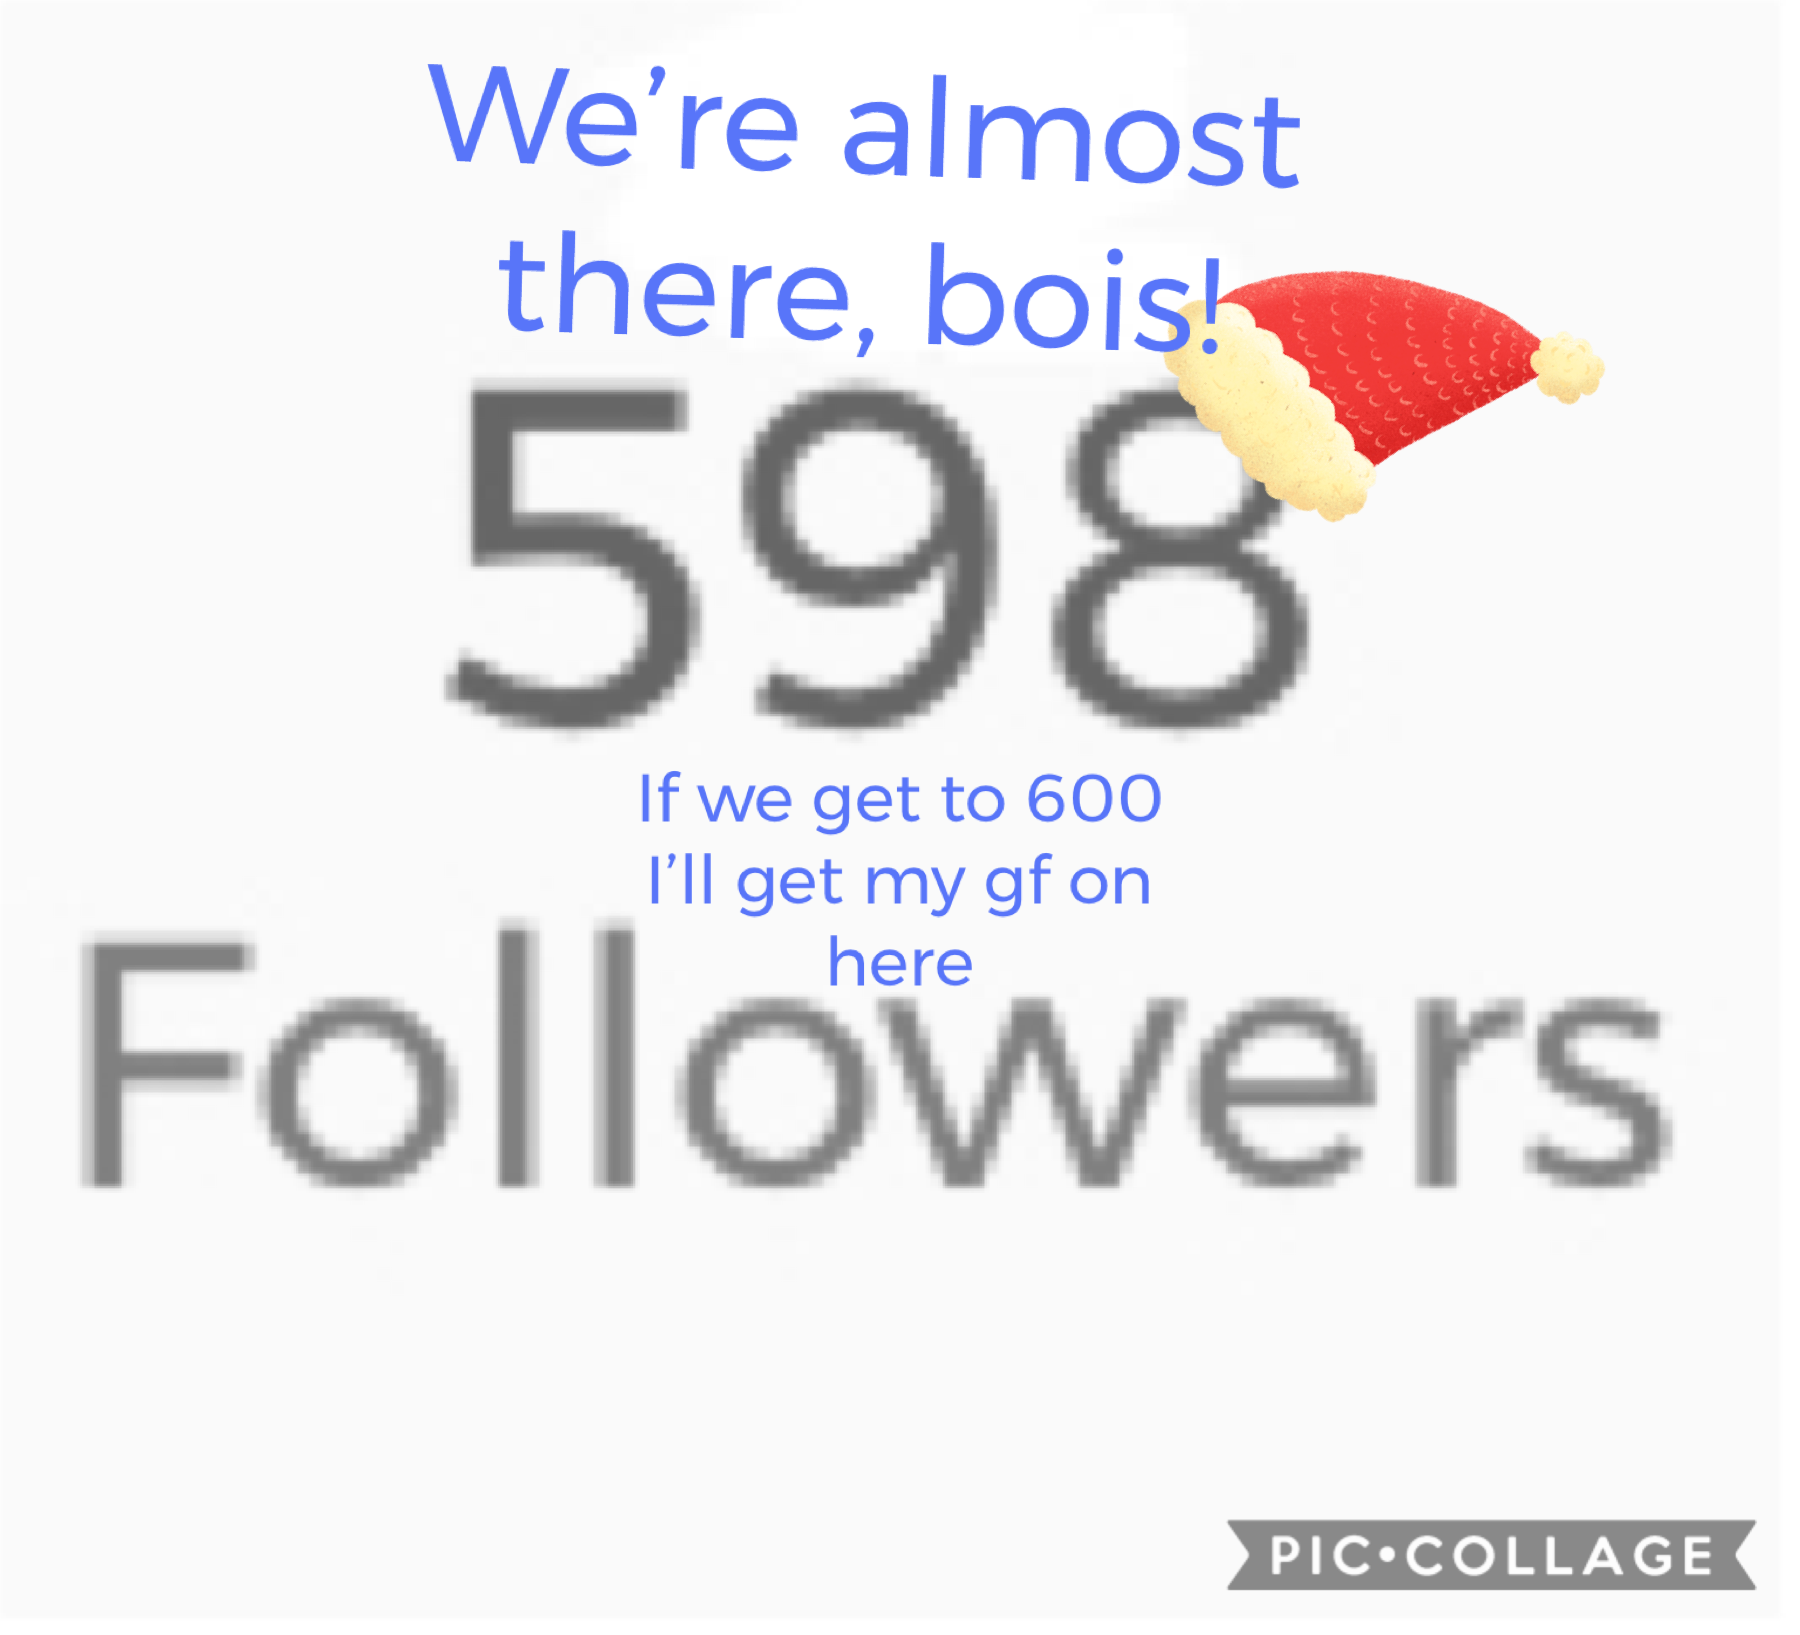 ALMOST TO 600!